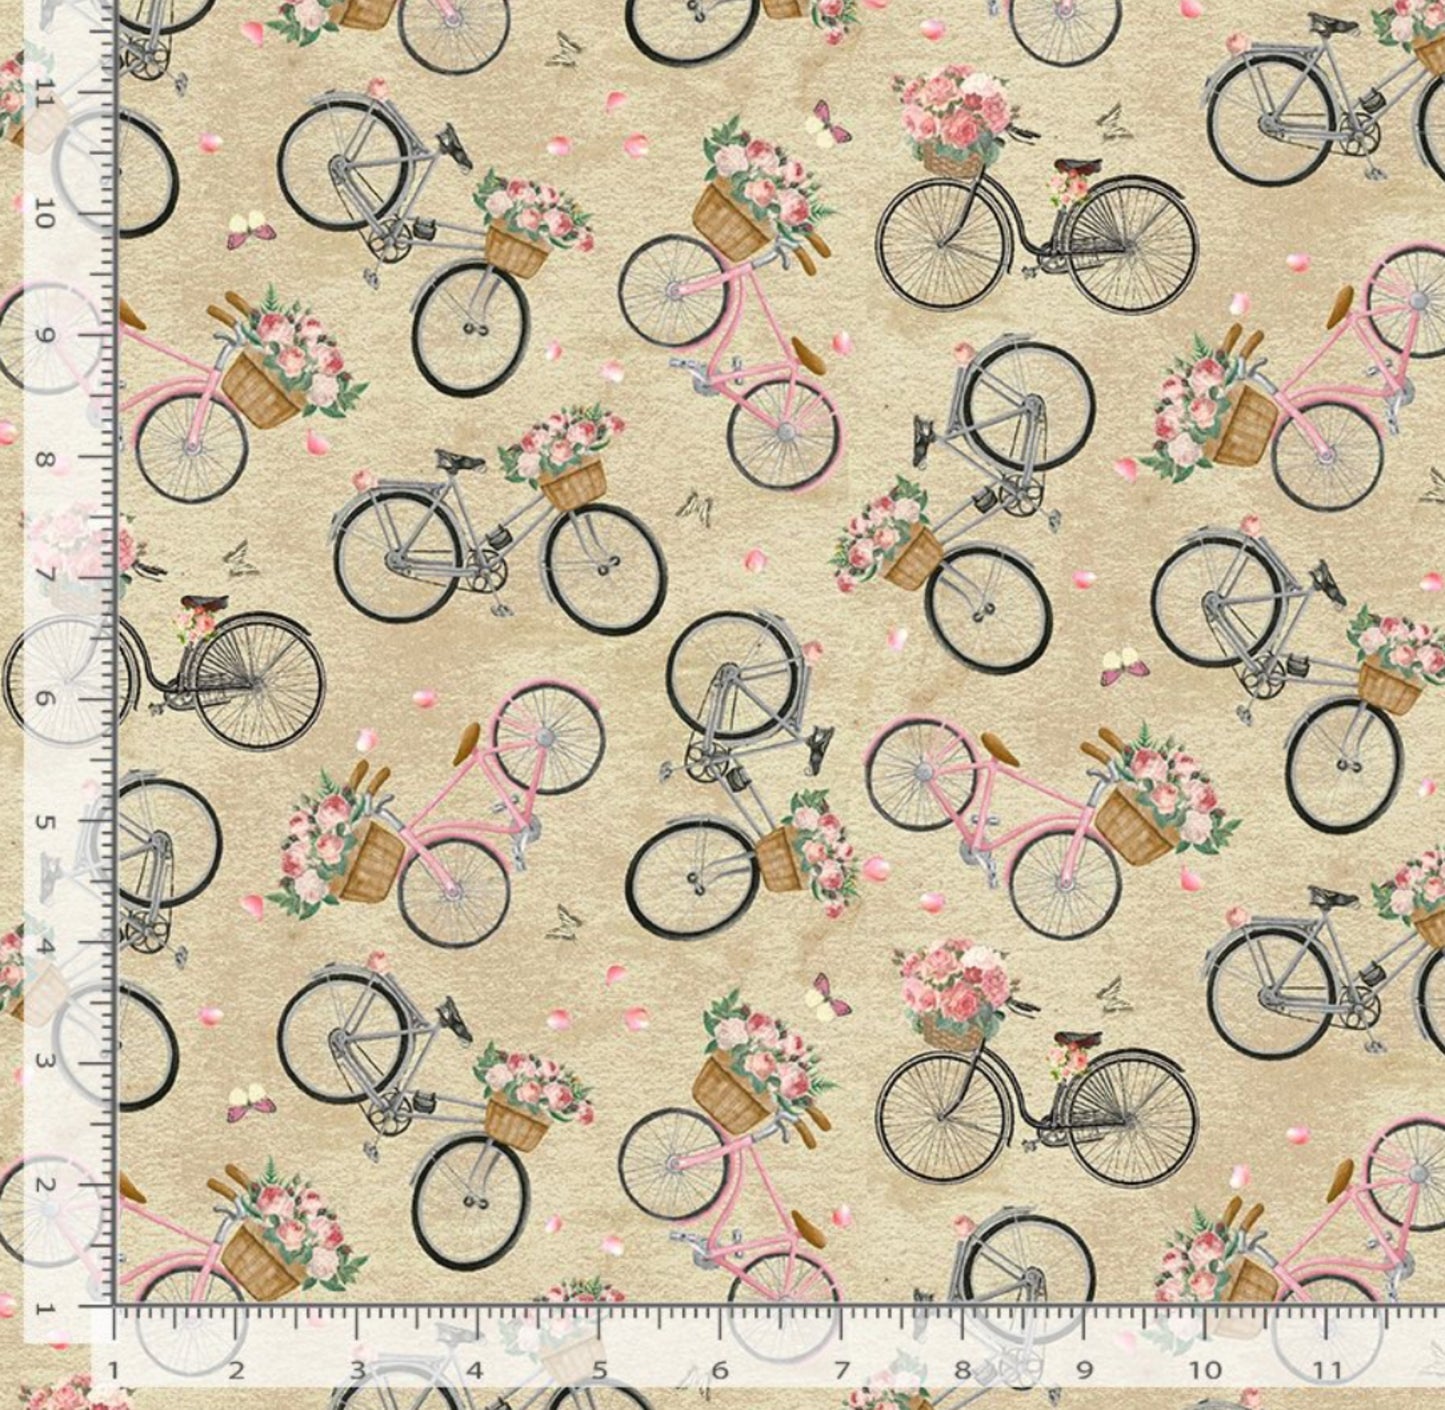 French Floral Bike Fabric - Bicycles From the Jardin Collection - Timeless Treasures